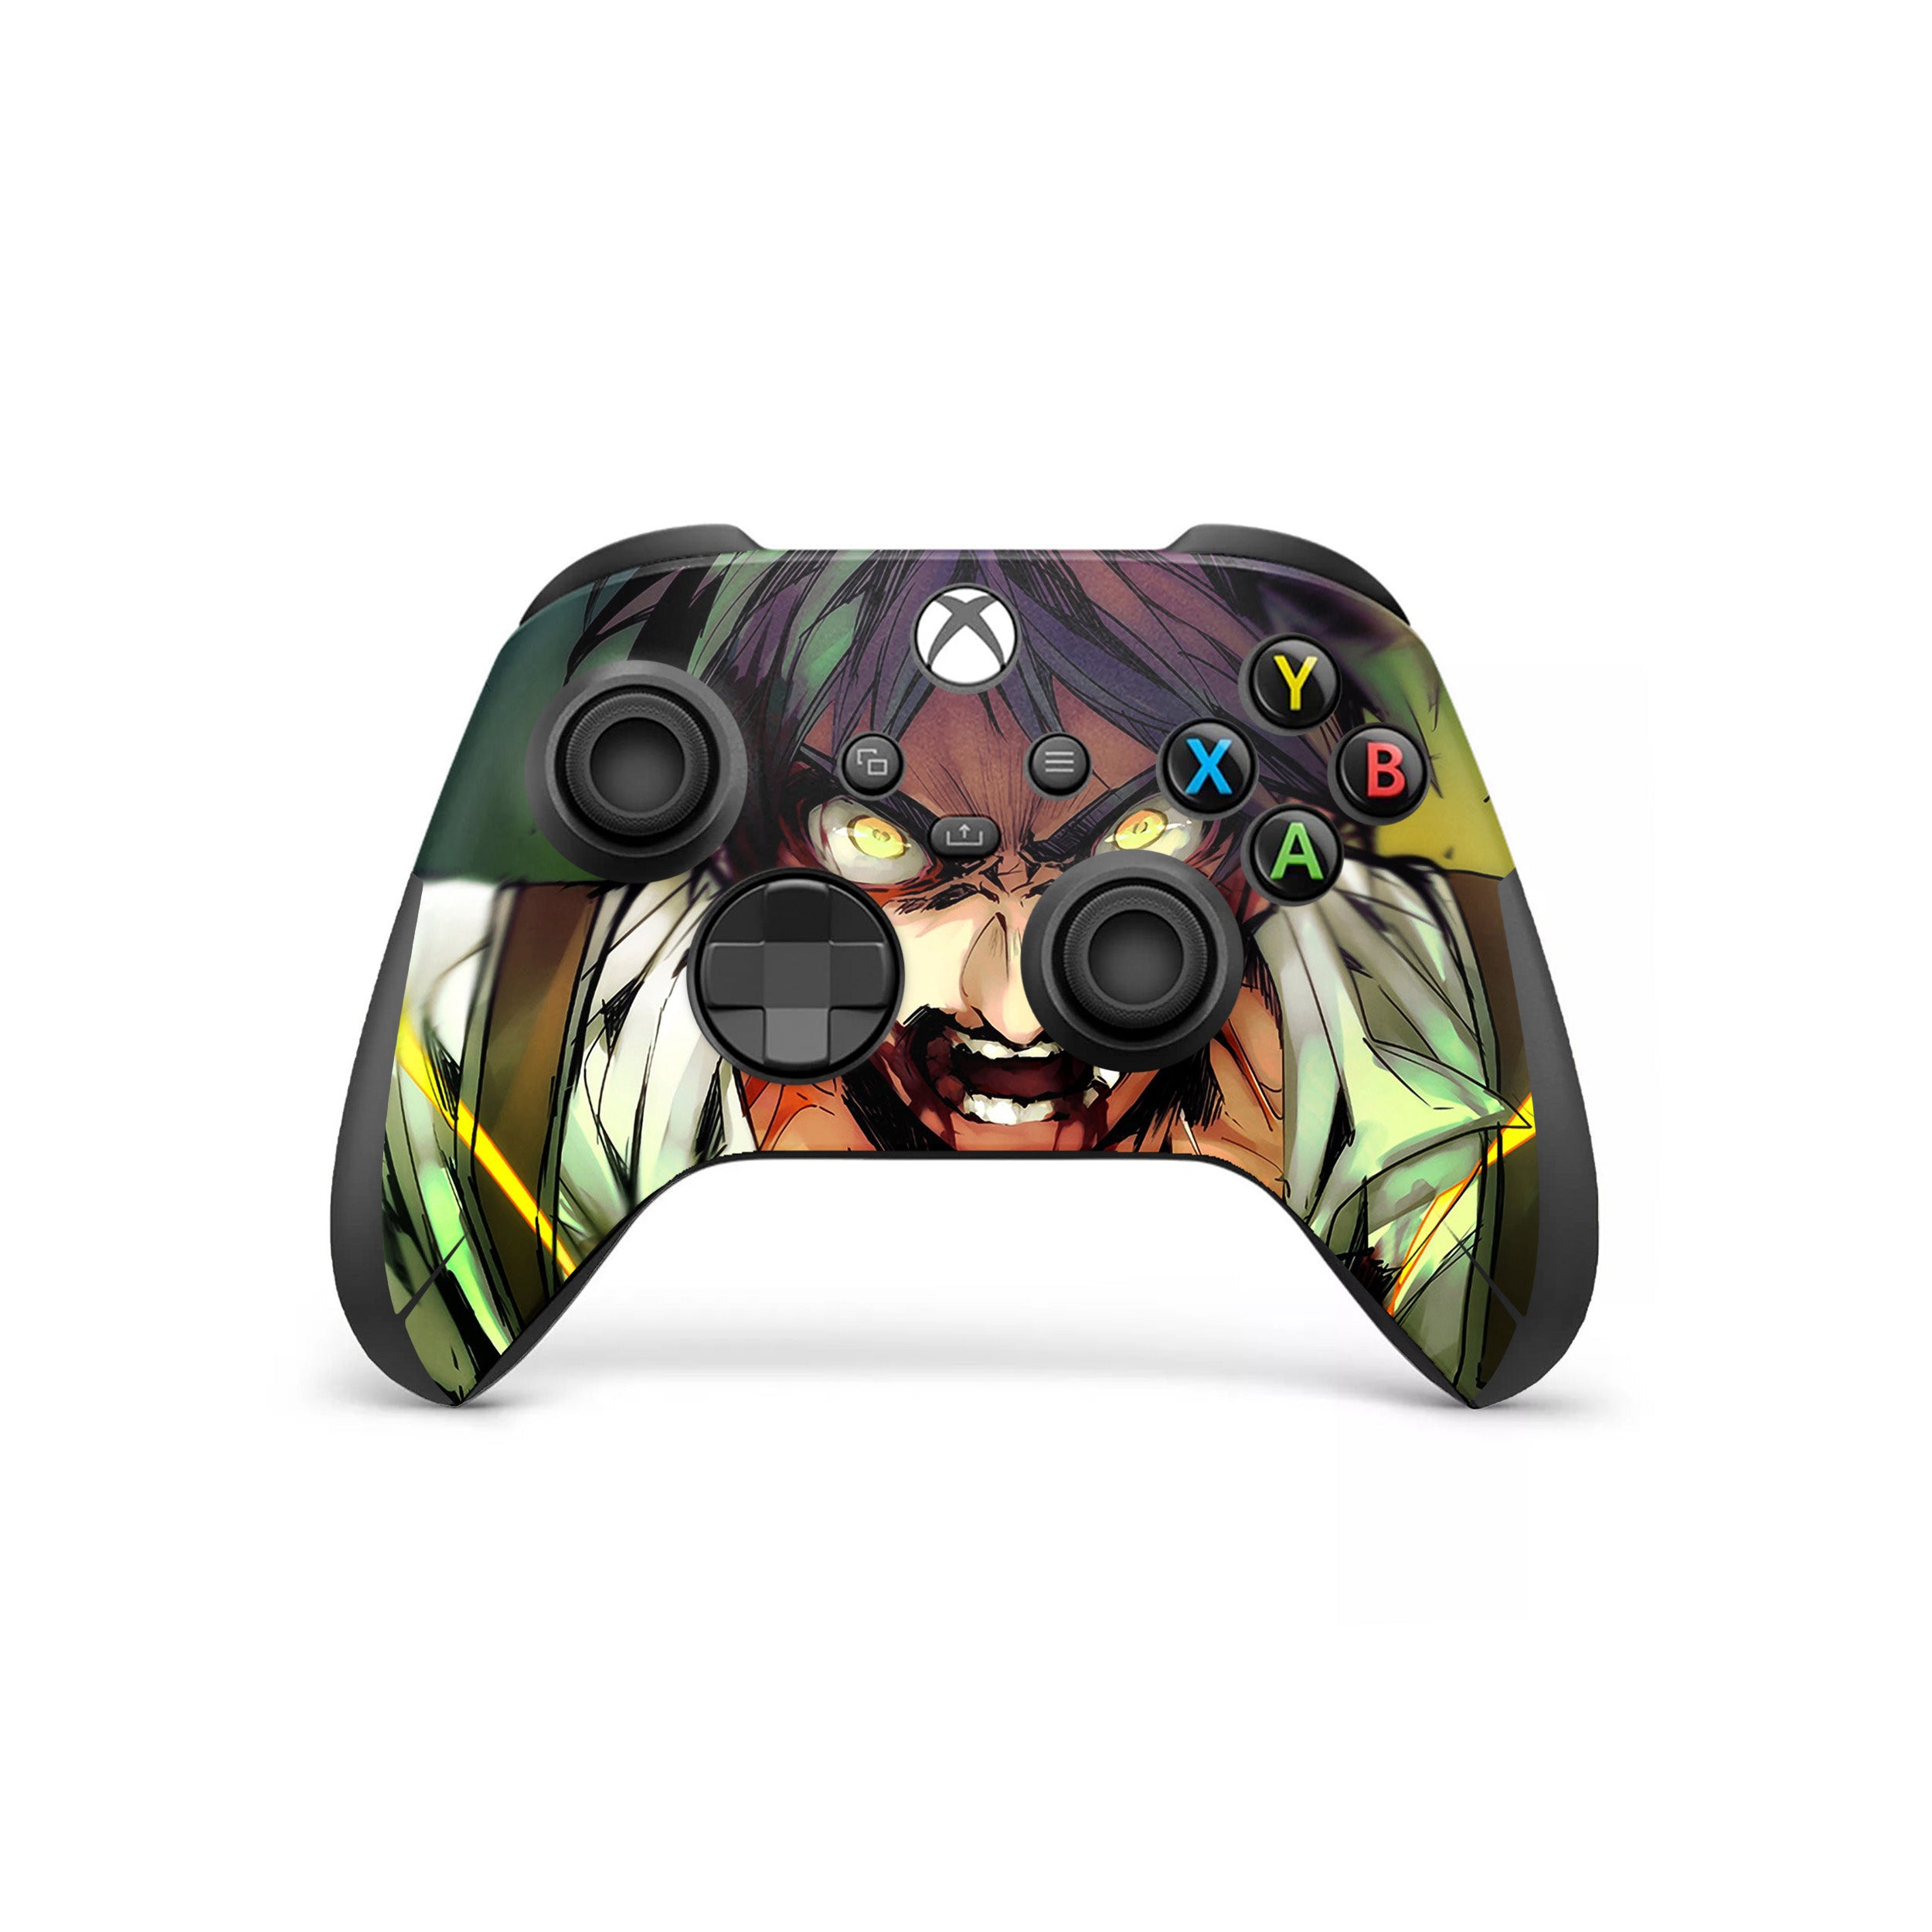 A video game skin featuring a Attack On Titan Eren Yeager design for the Xbox Wireless Controller.